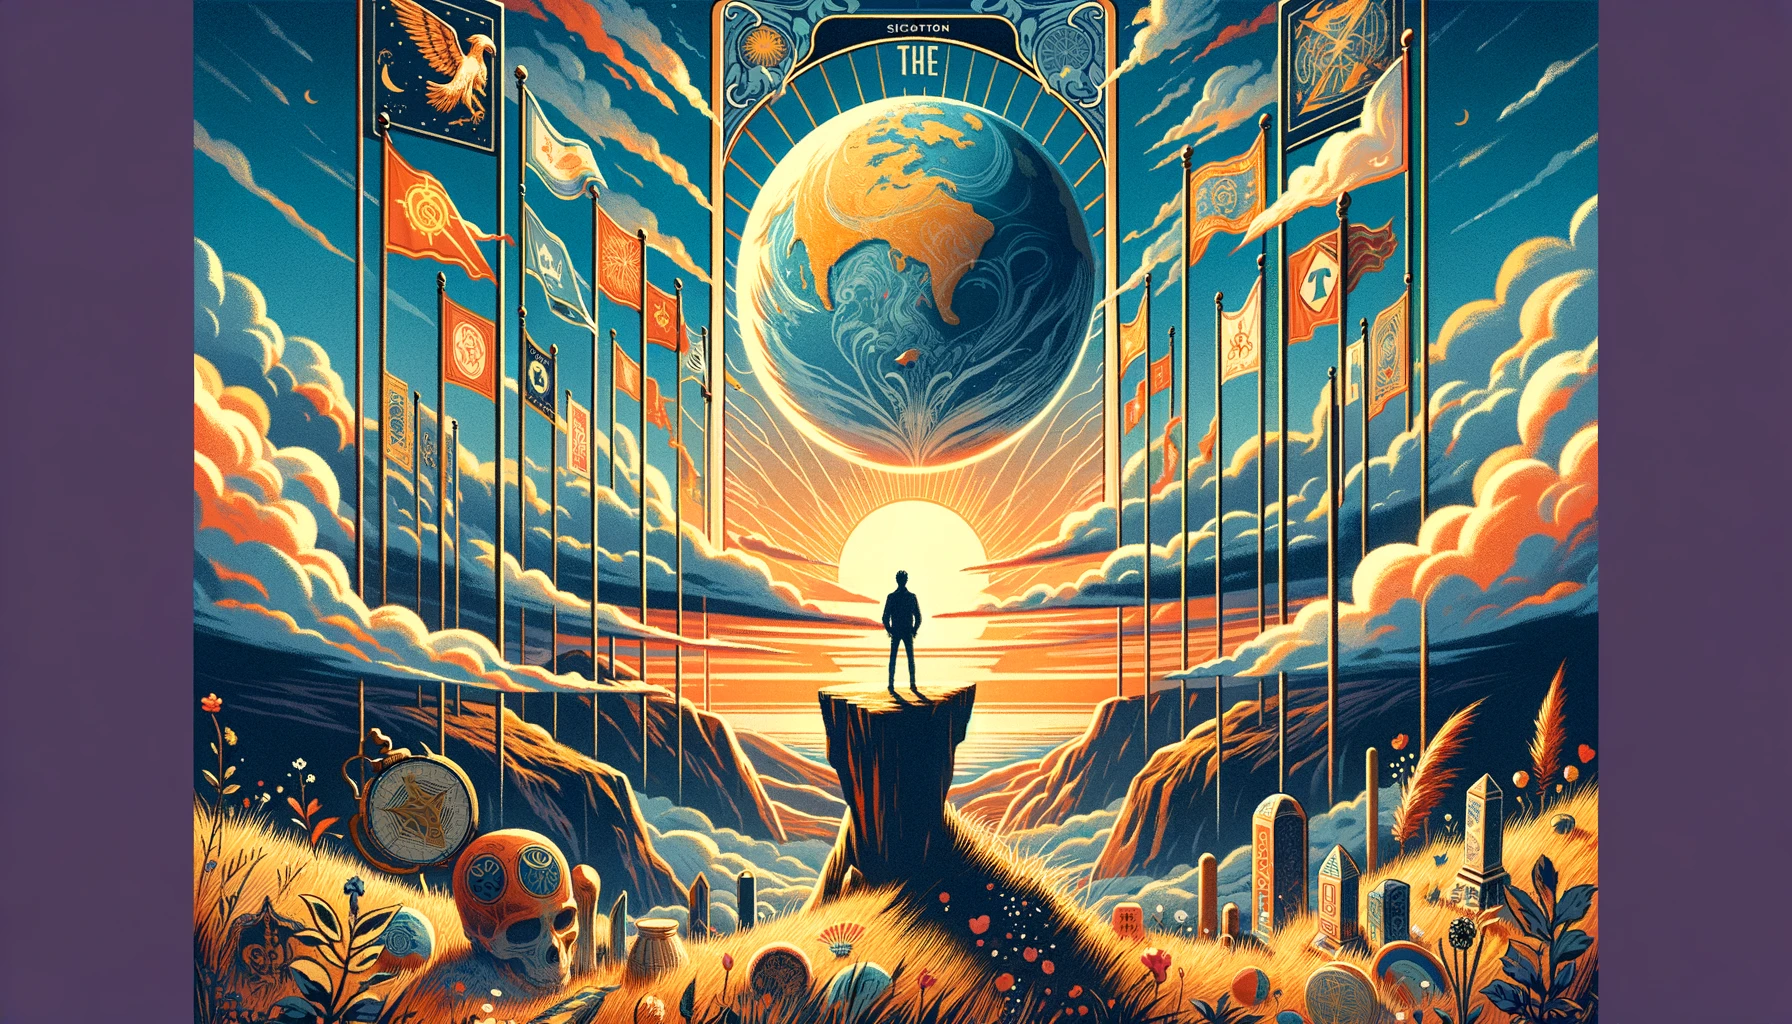 "Illustration representing completion, success, and the culmination of a long journey with 'The World' Tarot card. Depicts a figure surrounded by symbolic elements, indicating endings, transitions, and the beginning of new chapters. Symbolizes achievement and fulfillment after reaching the end of a significant phase in life."